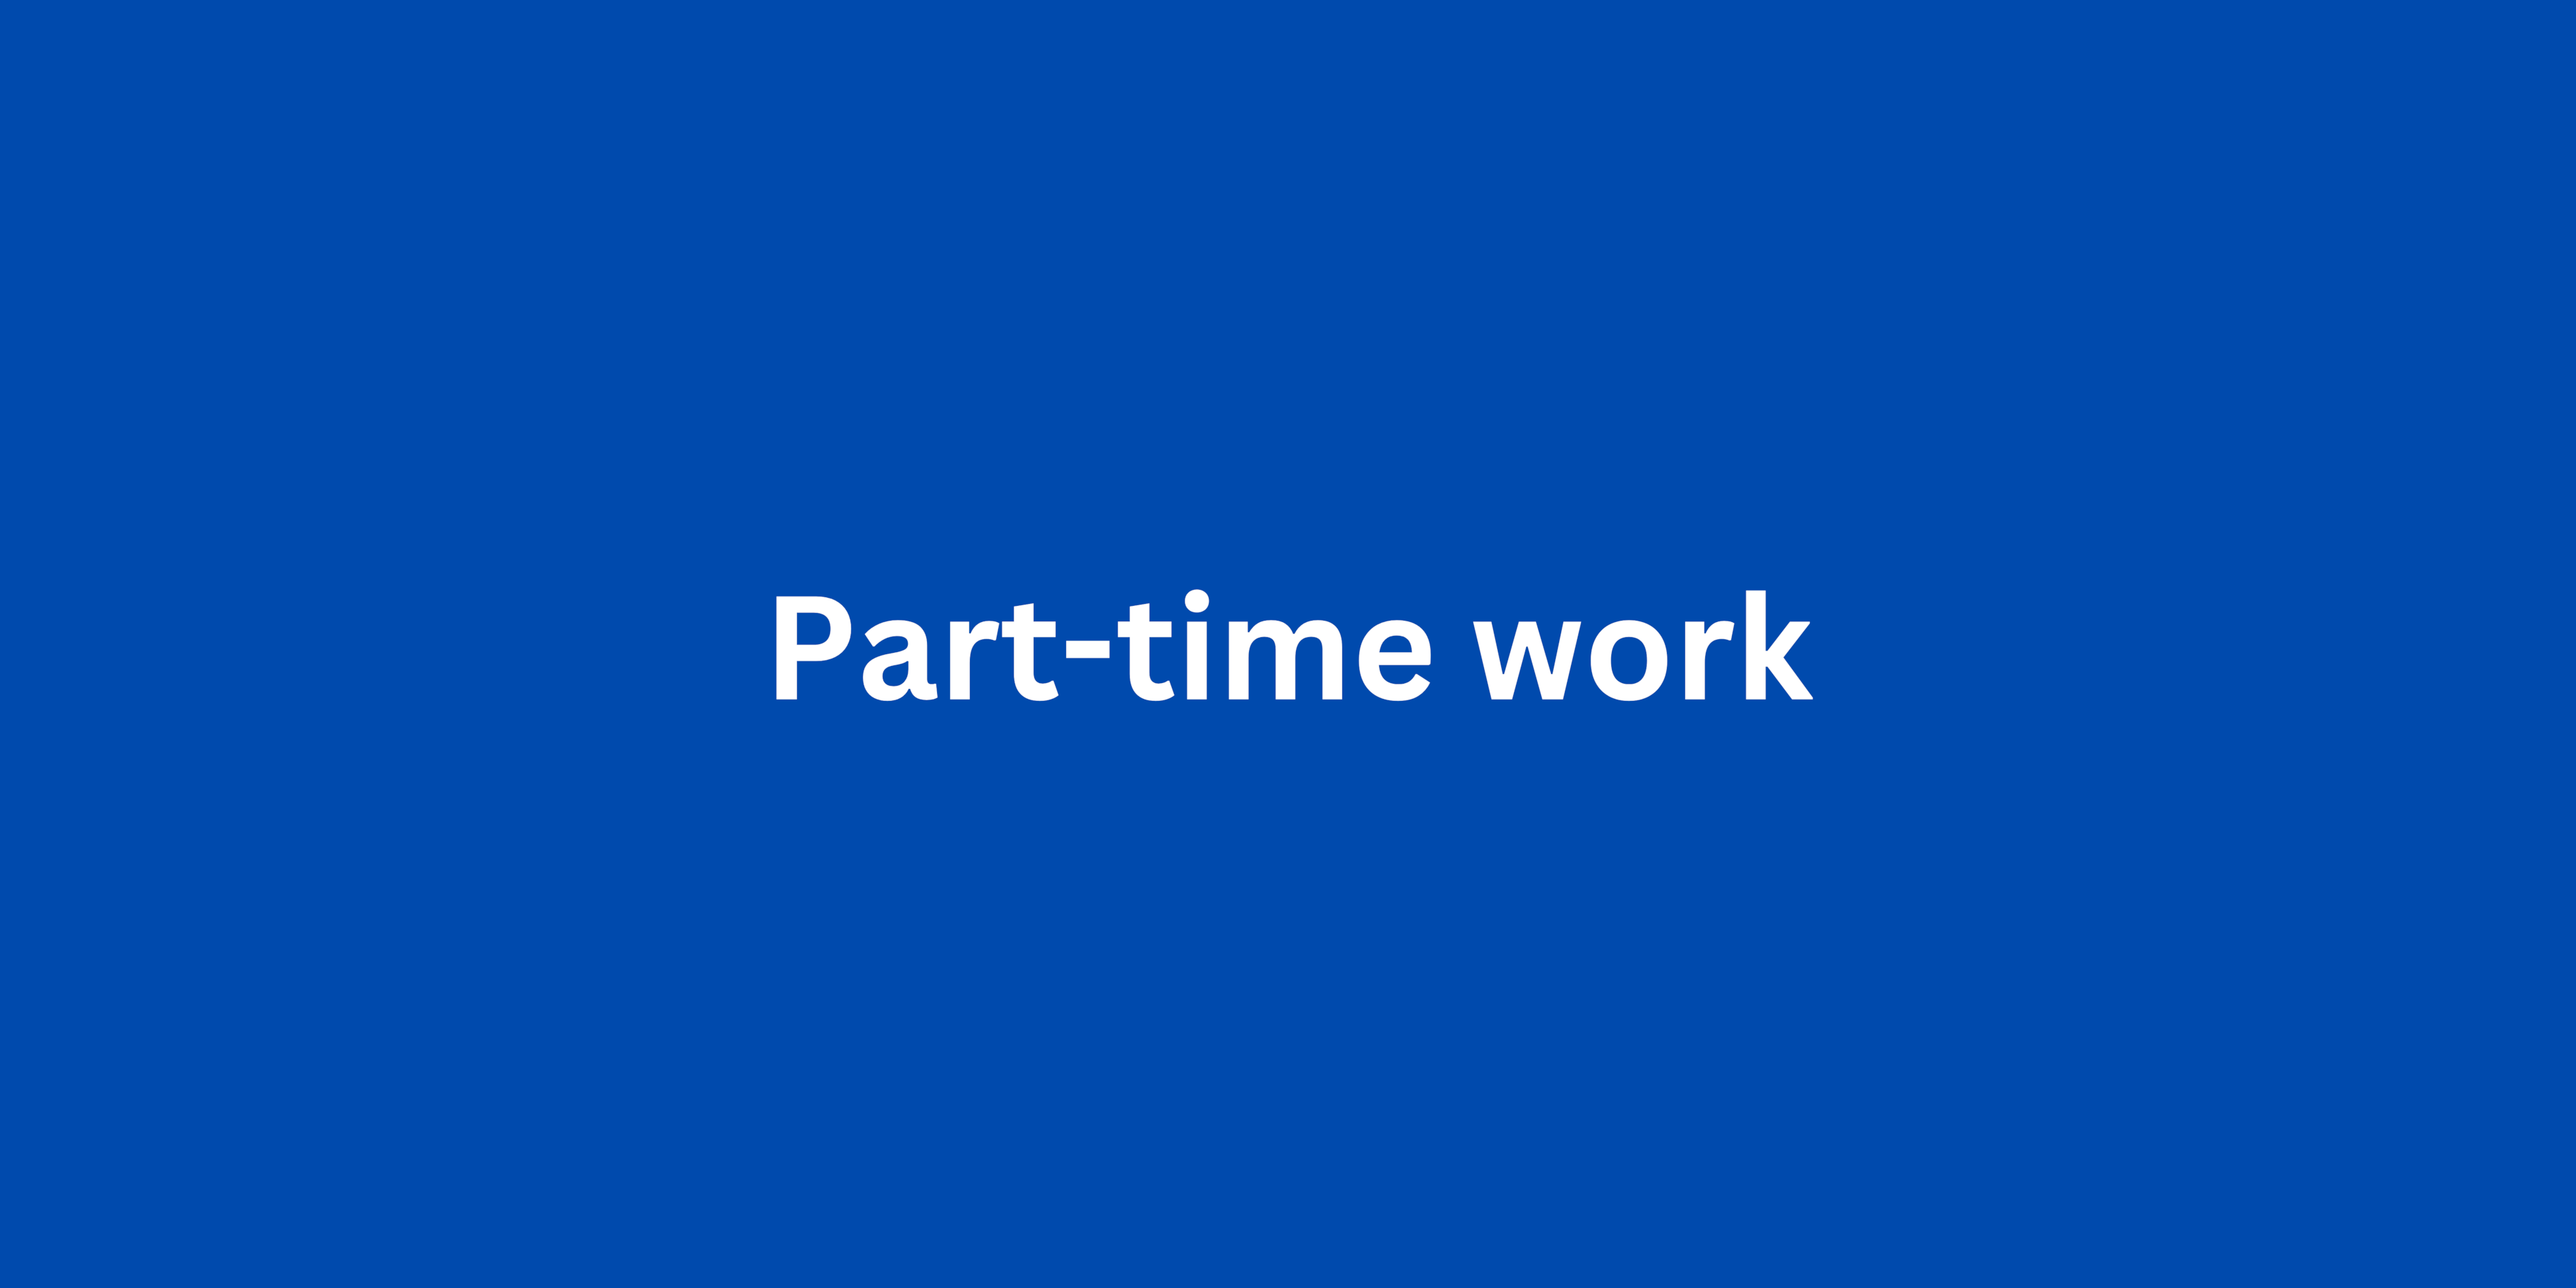 Part-time work